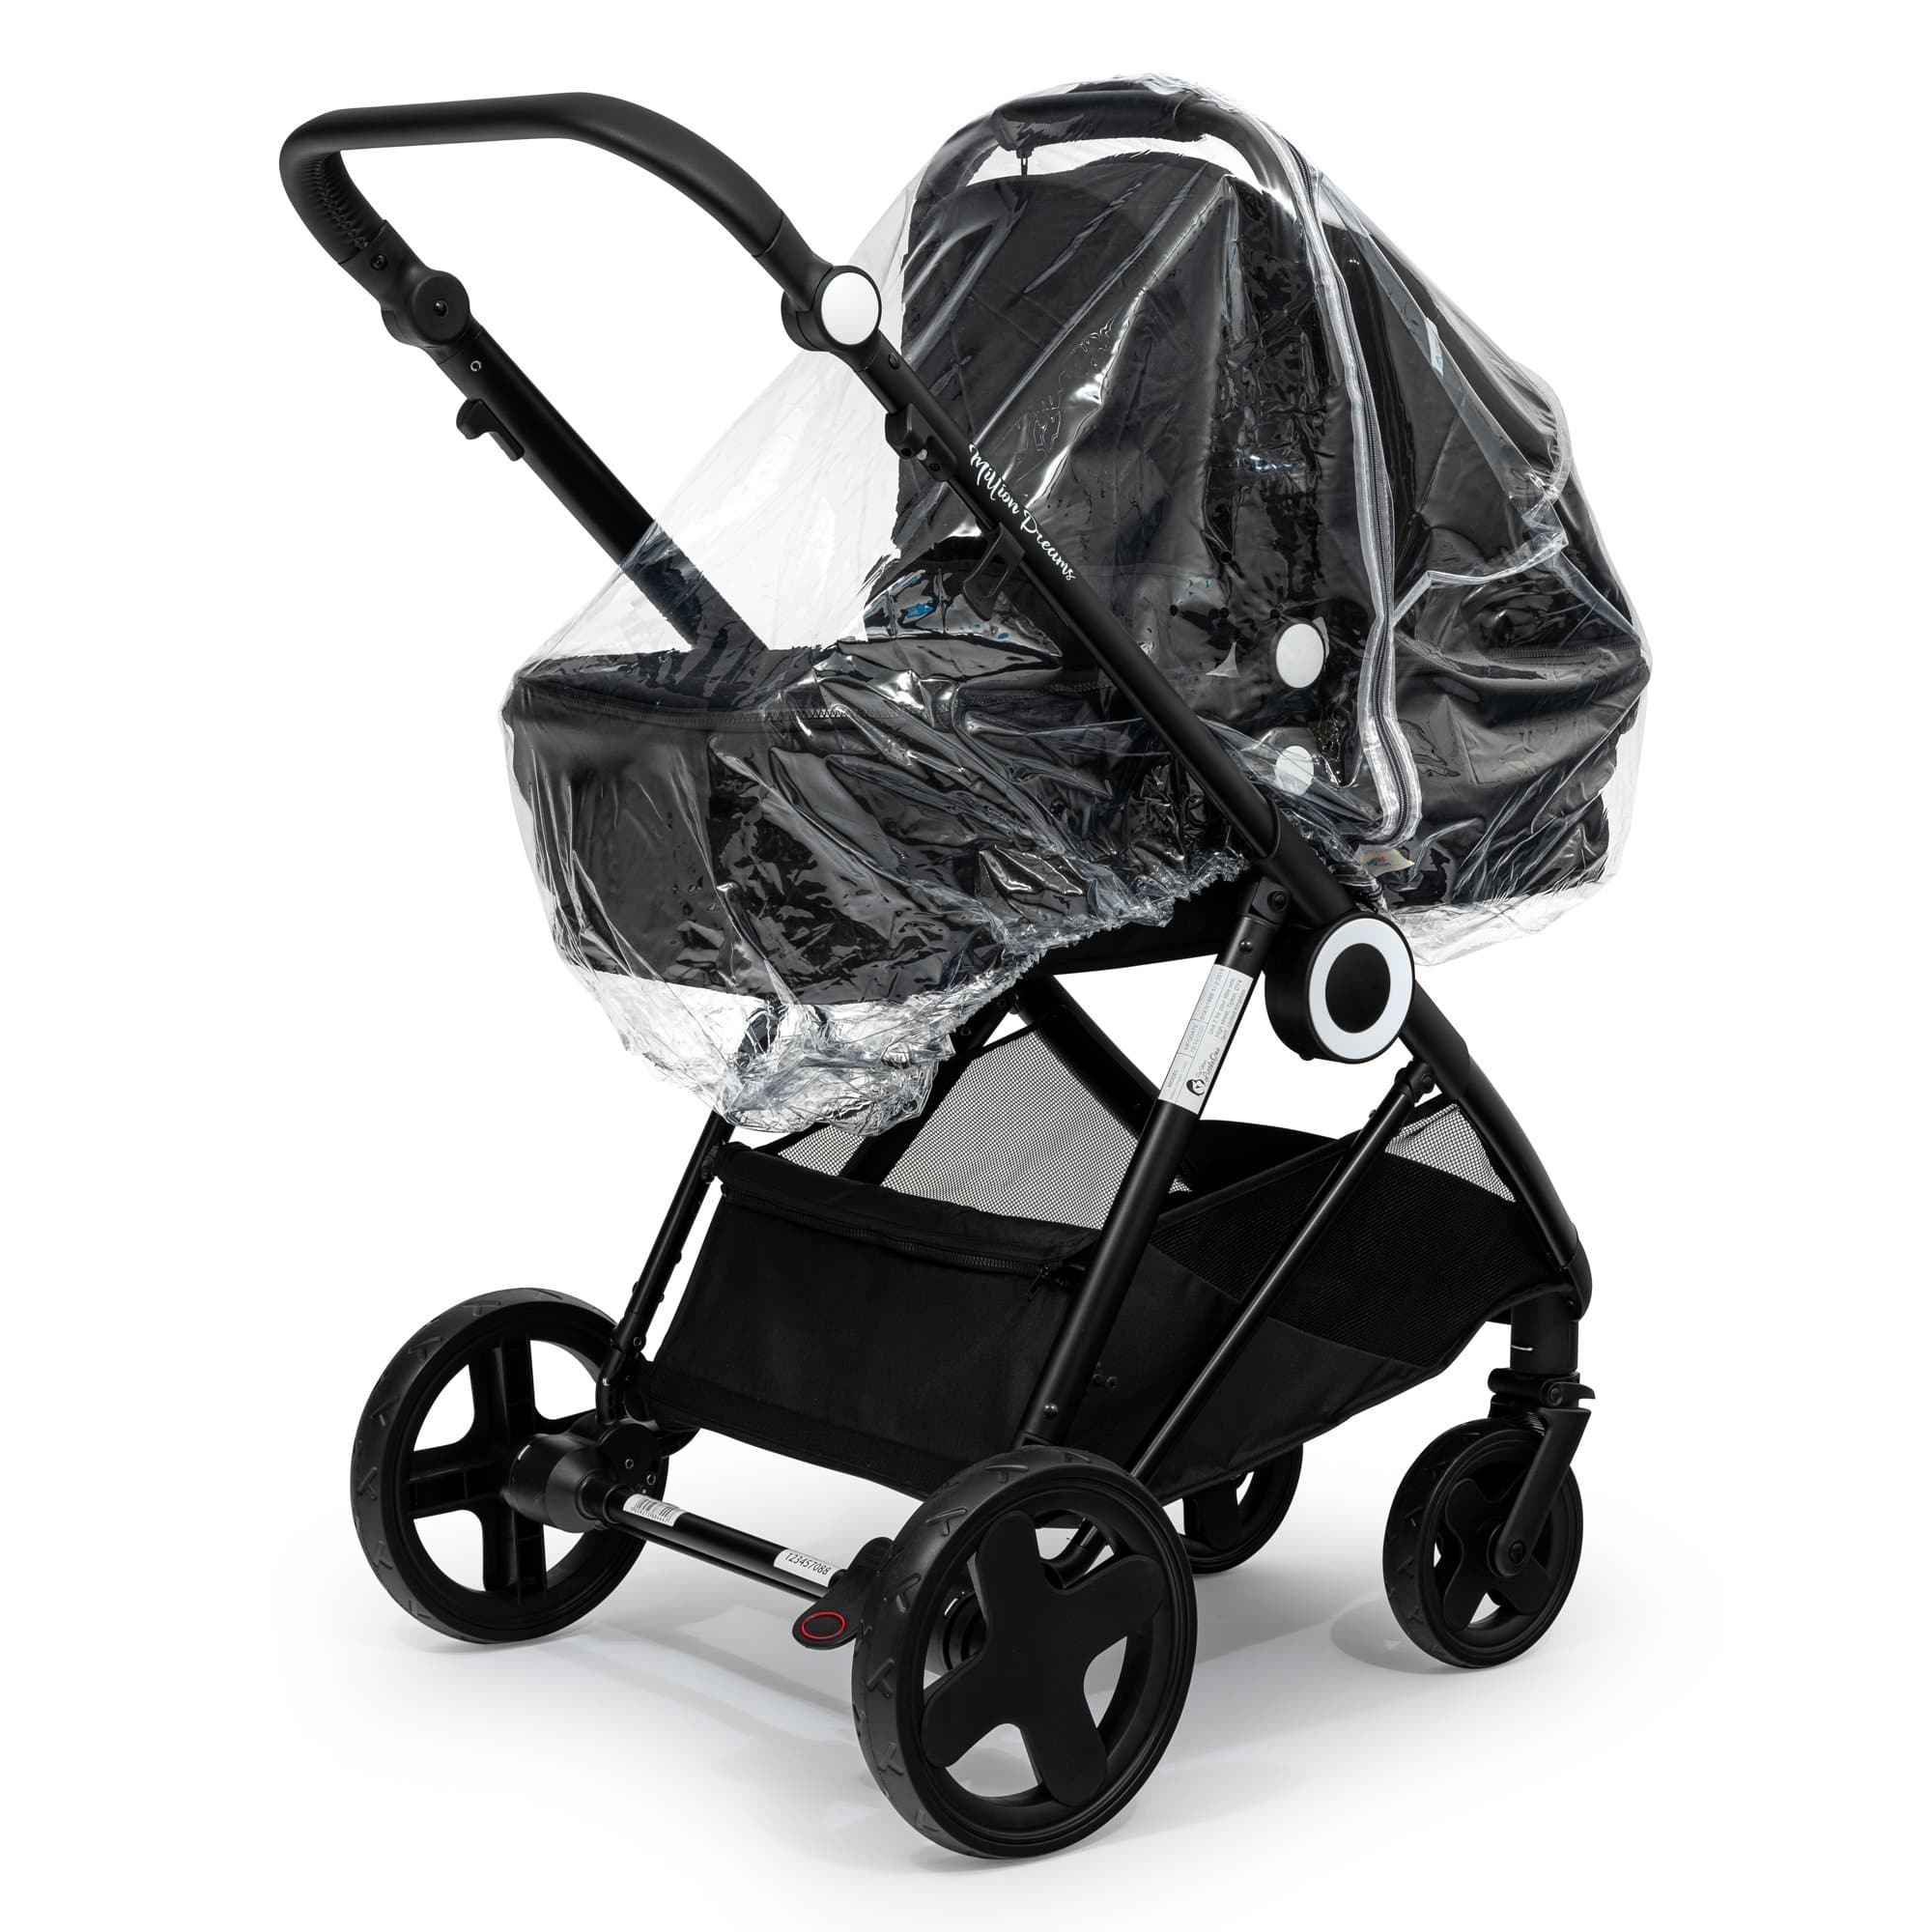 2 in 1 Rain Cover Compatible with Mountain Buggy - Fits All Models - For Your Little One